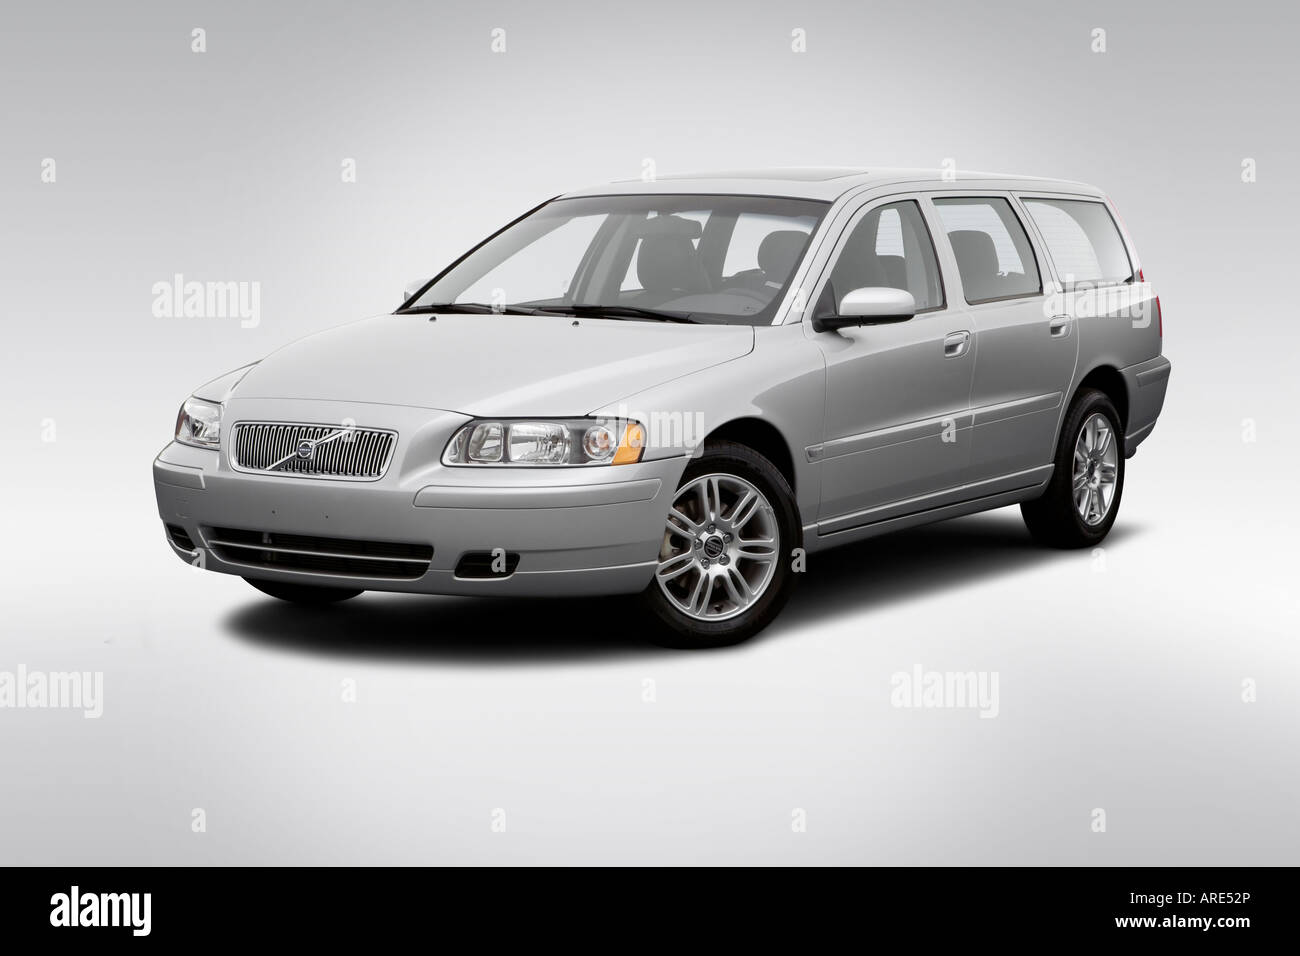 2006 Volvo V70 2.4 in Silver - Front angle view Stock Photo - Alamy